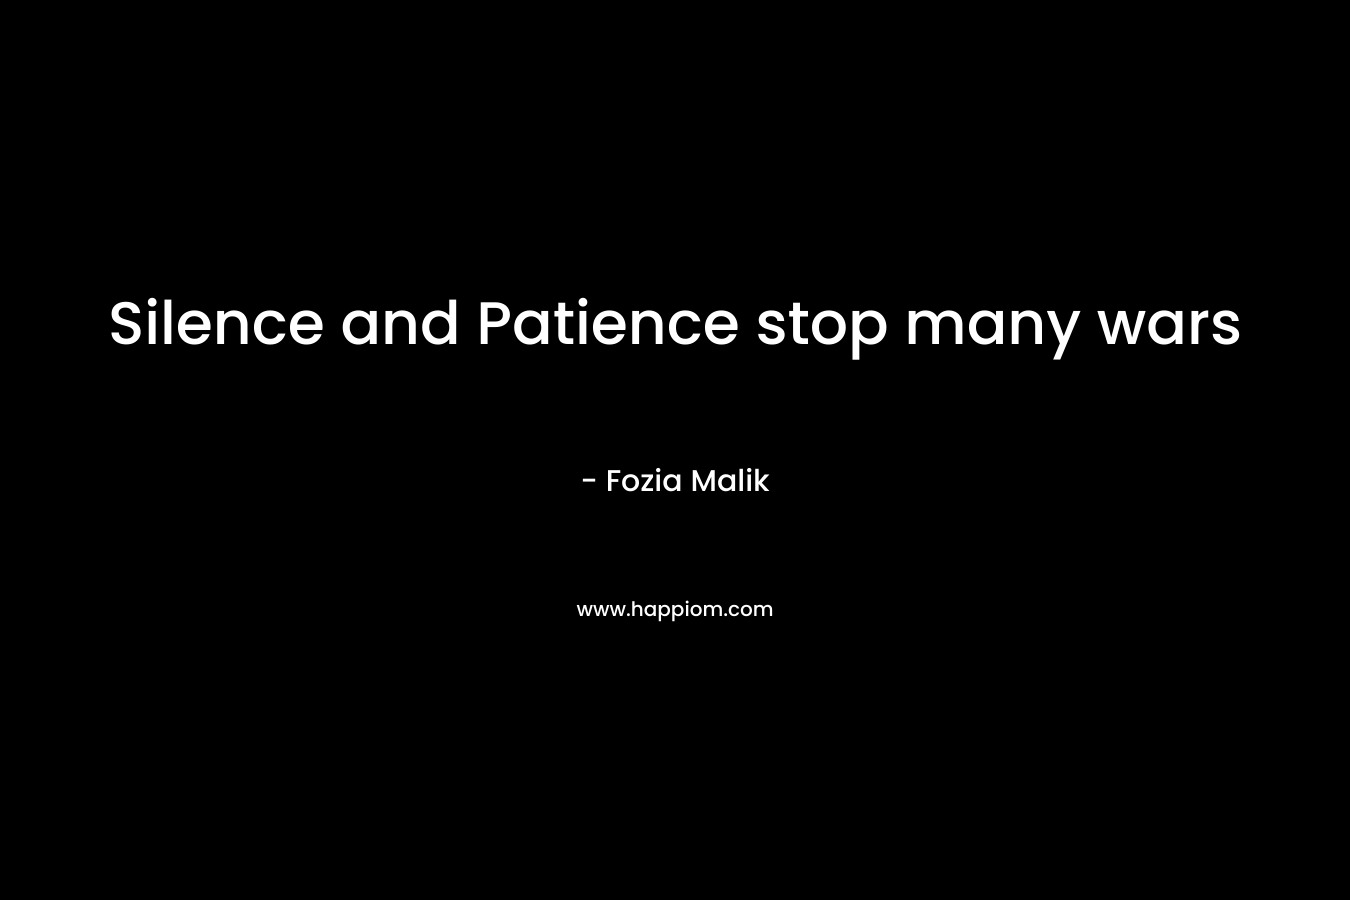 Silence and Patience stop many wars